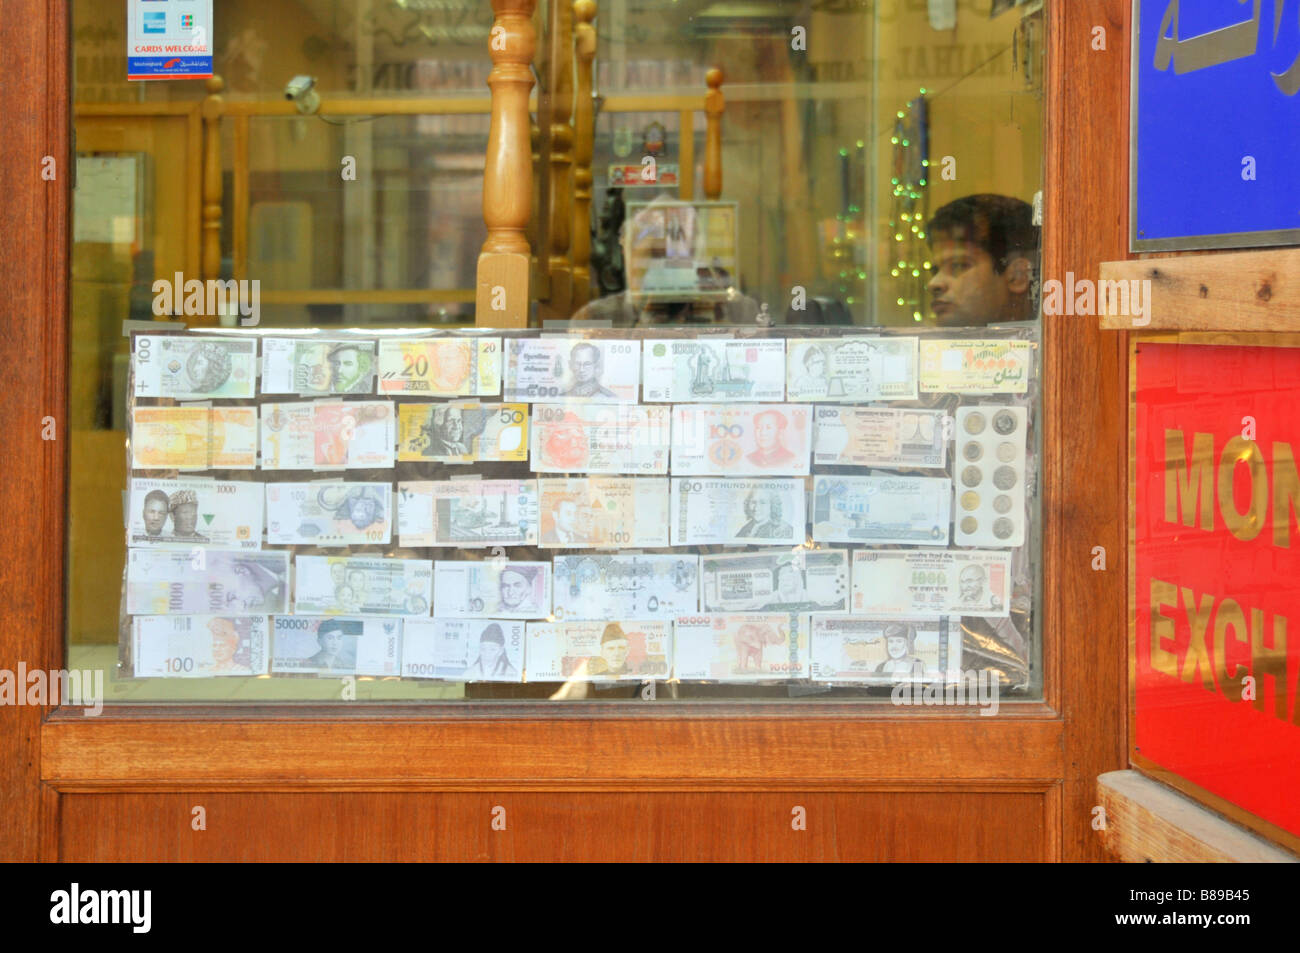 Dubai money exchange shop window displaying faded banknotes located in the 'Dubai Old Souk' open air market in United Arab Emirates Asia Stock Photo